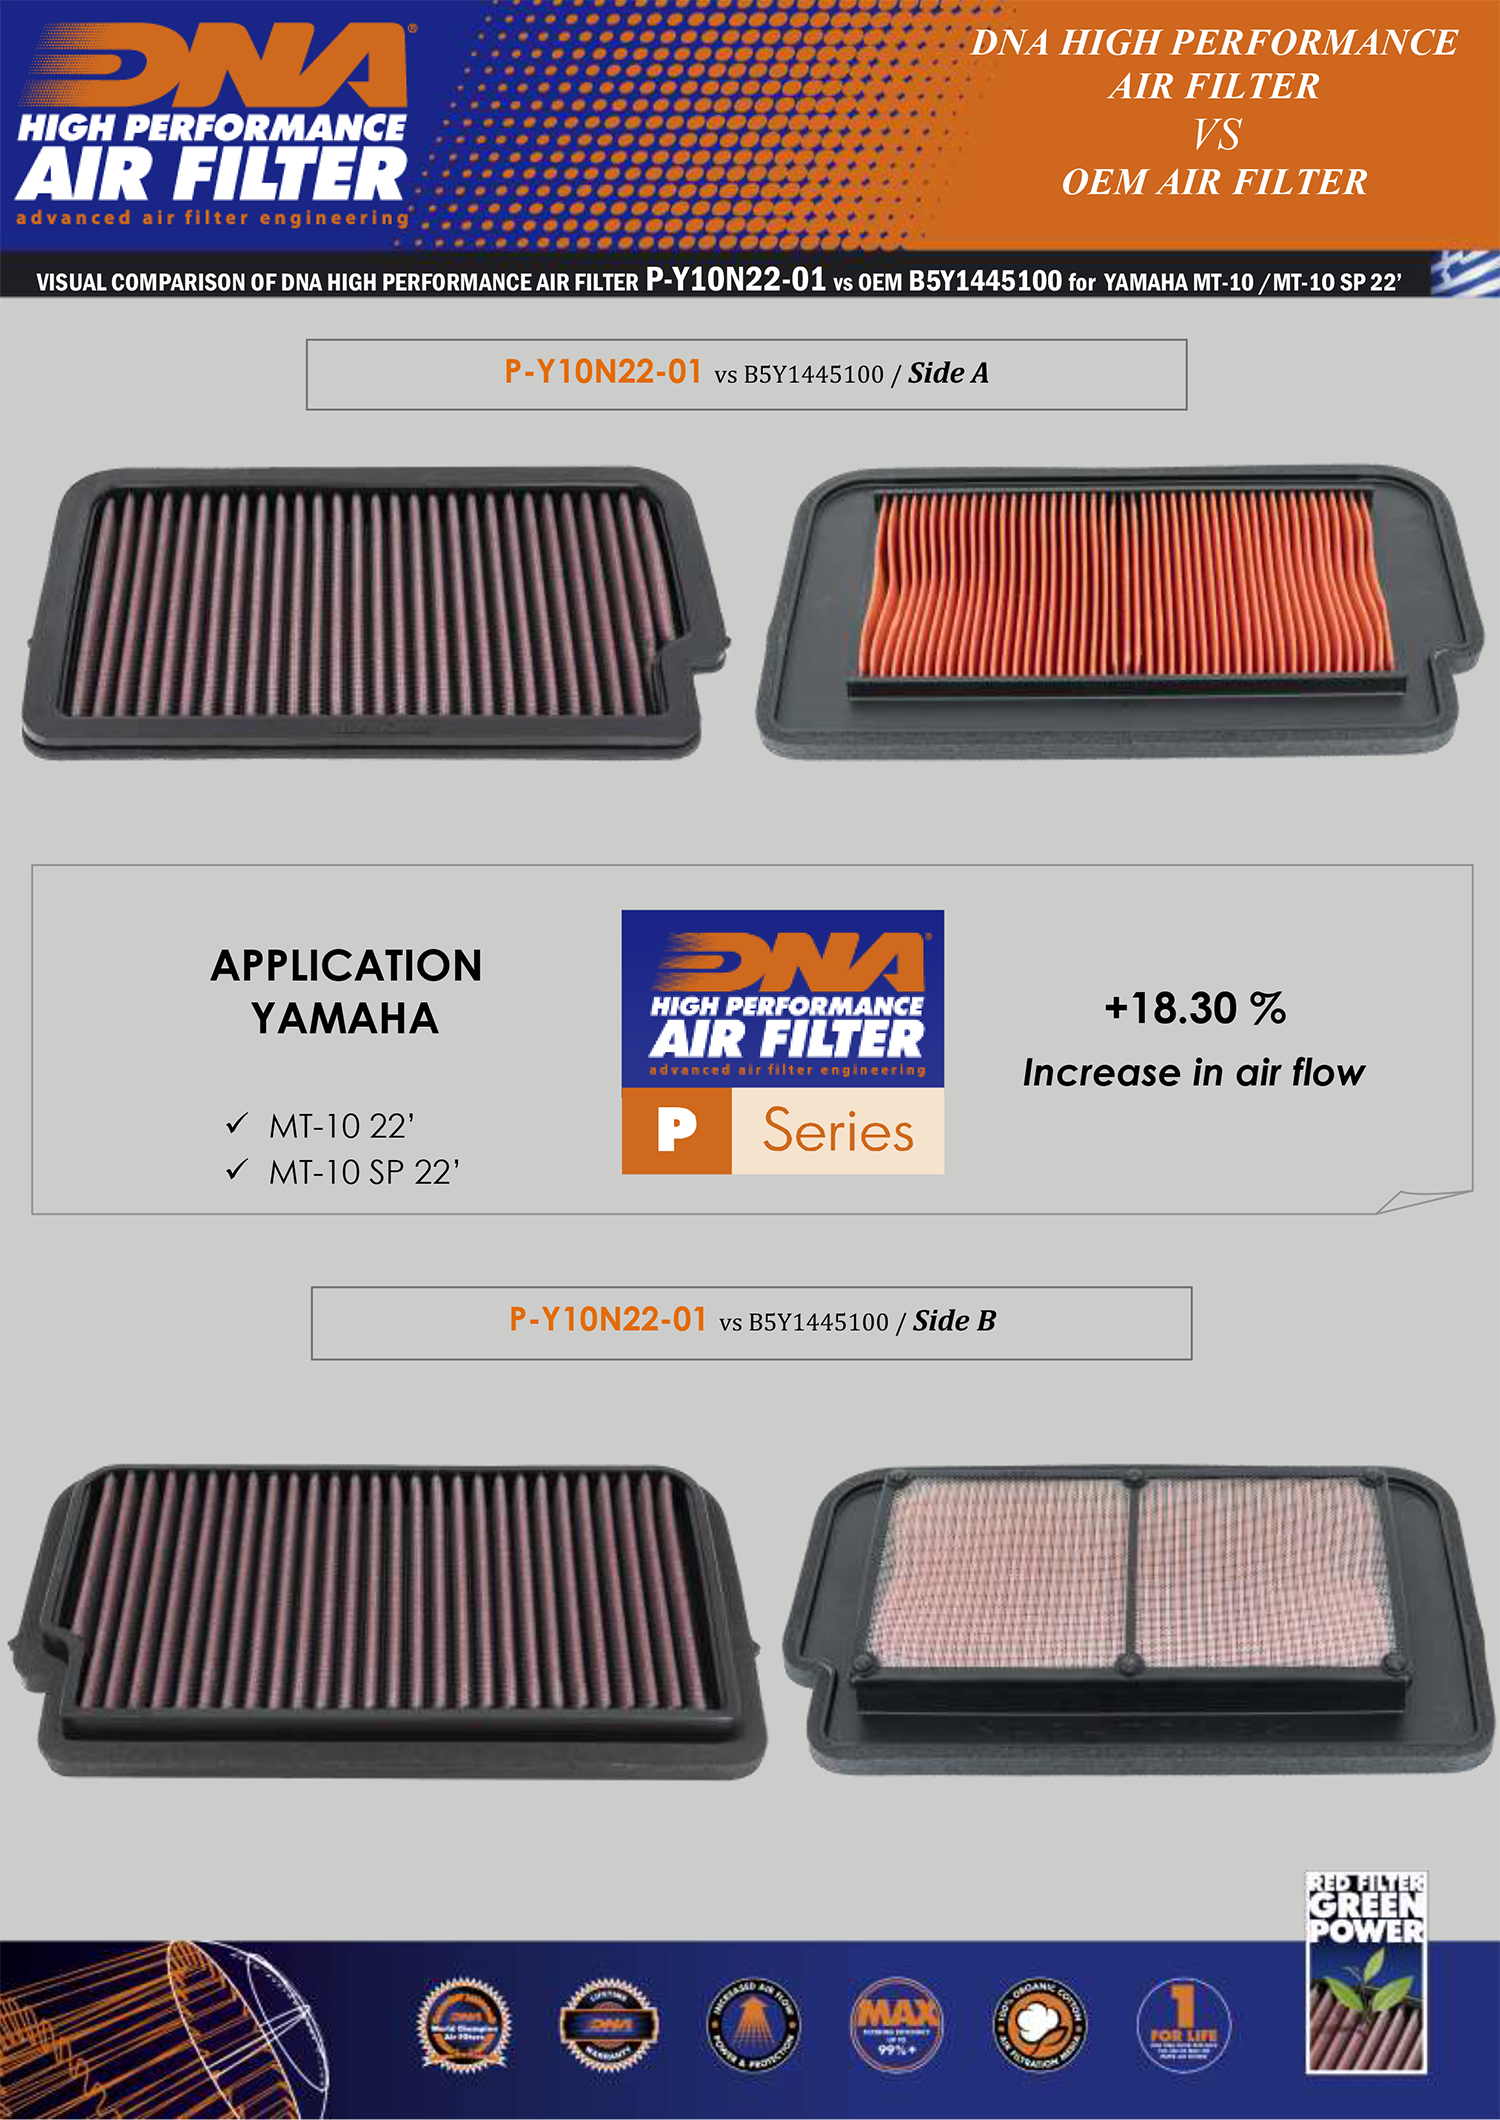 dna air filters maximize surface area resulting in complete efficiency for your system